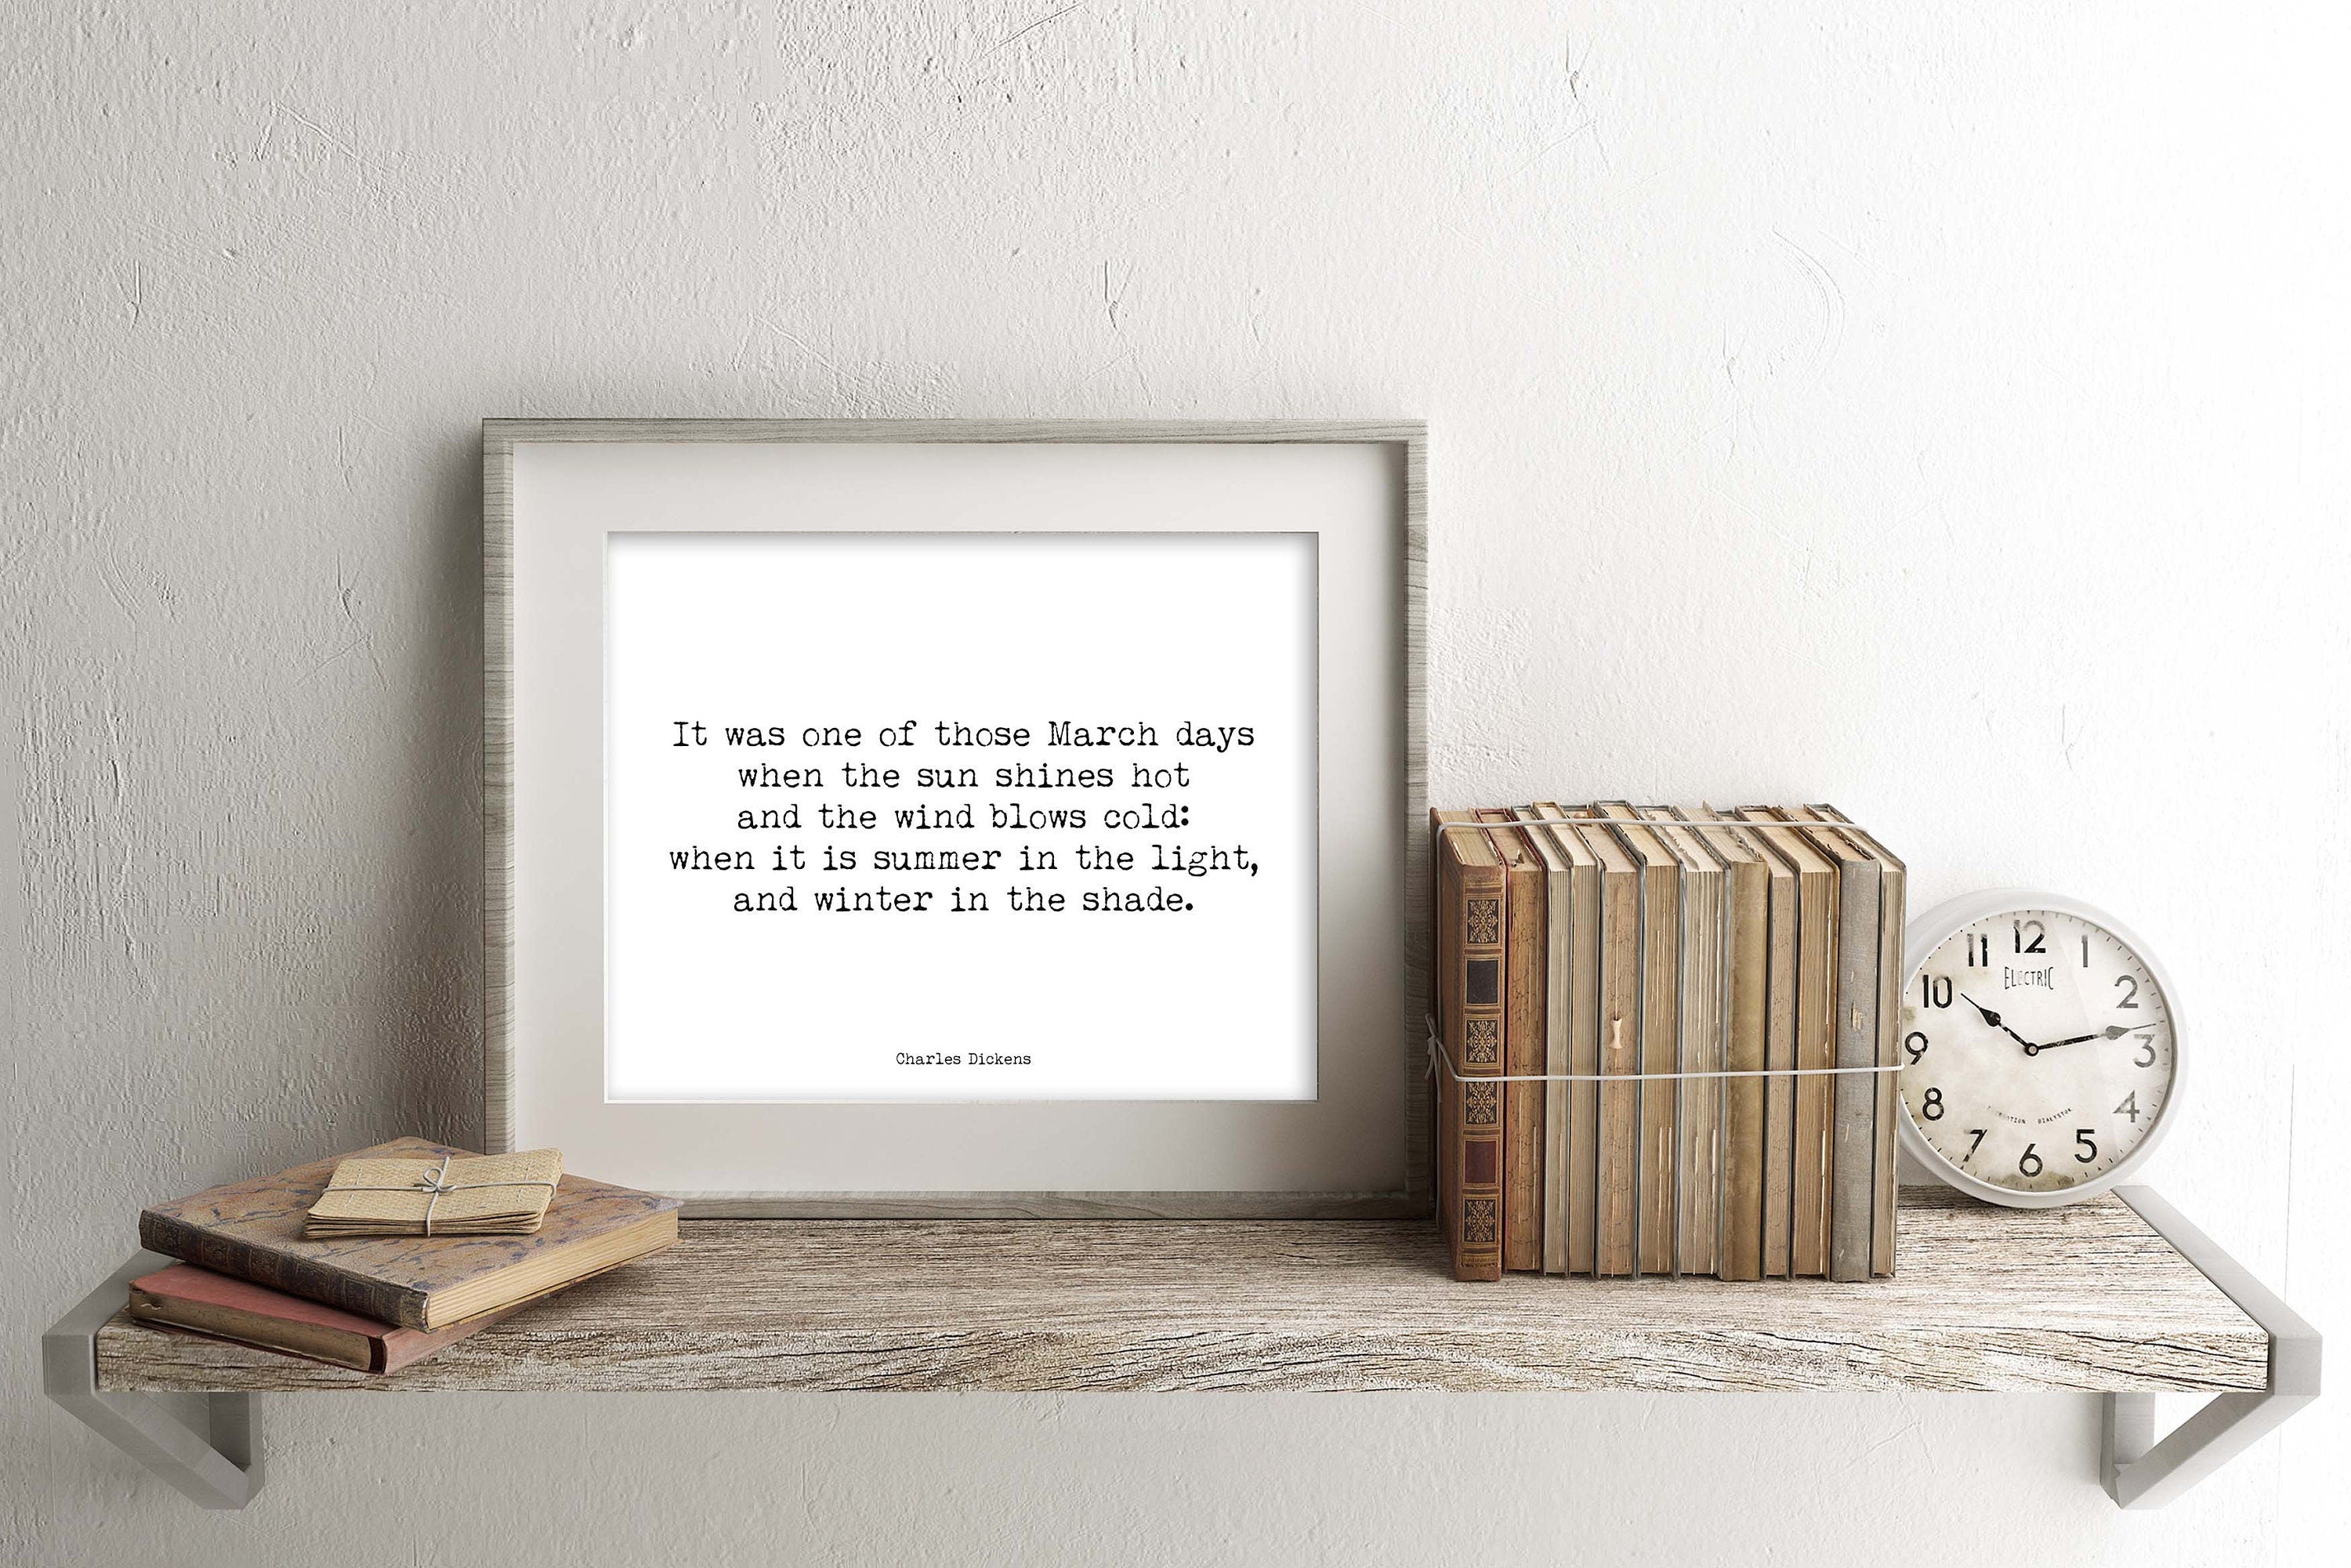 Charles Dickens Quote Print Wall Art from Great Expectations, Black & White unframed Art Print